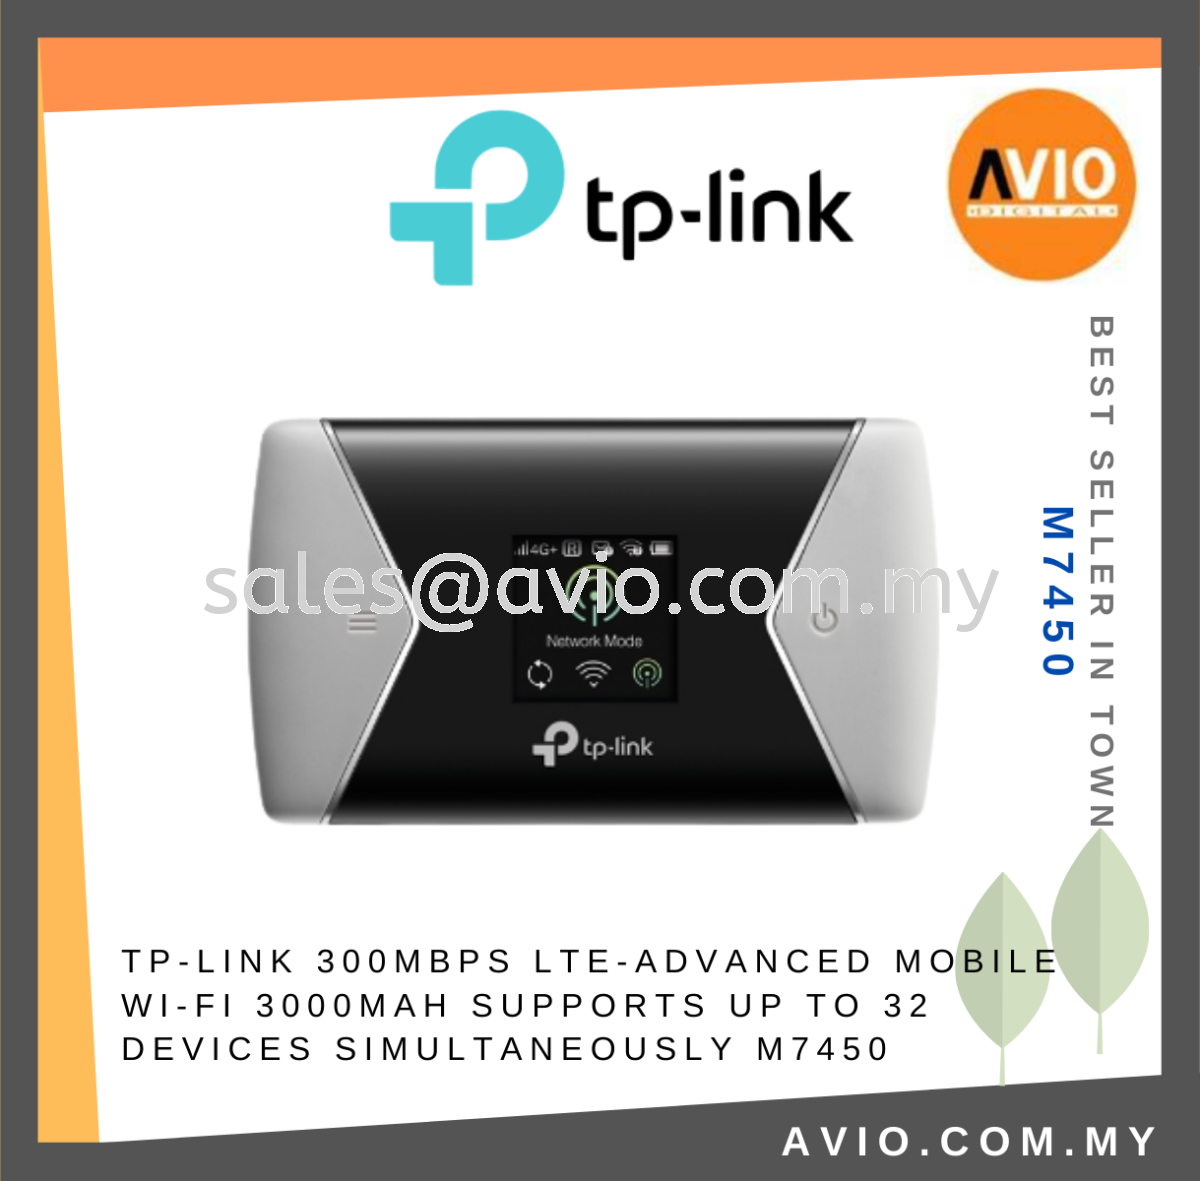 TP-LINK Tplink M7450 Dual Band 300Mbps LTE Advanced Mobile Wifi 3000mAH  Support 32 Device Micro